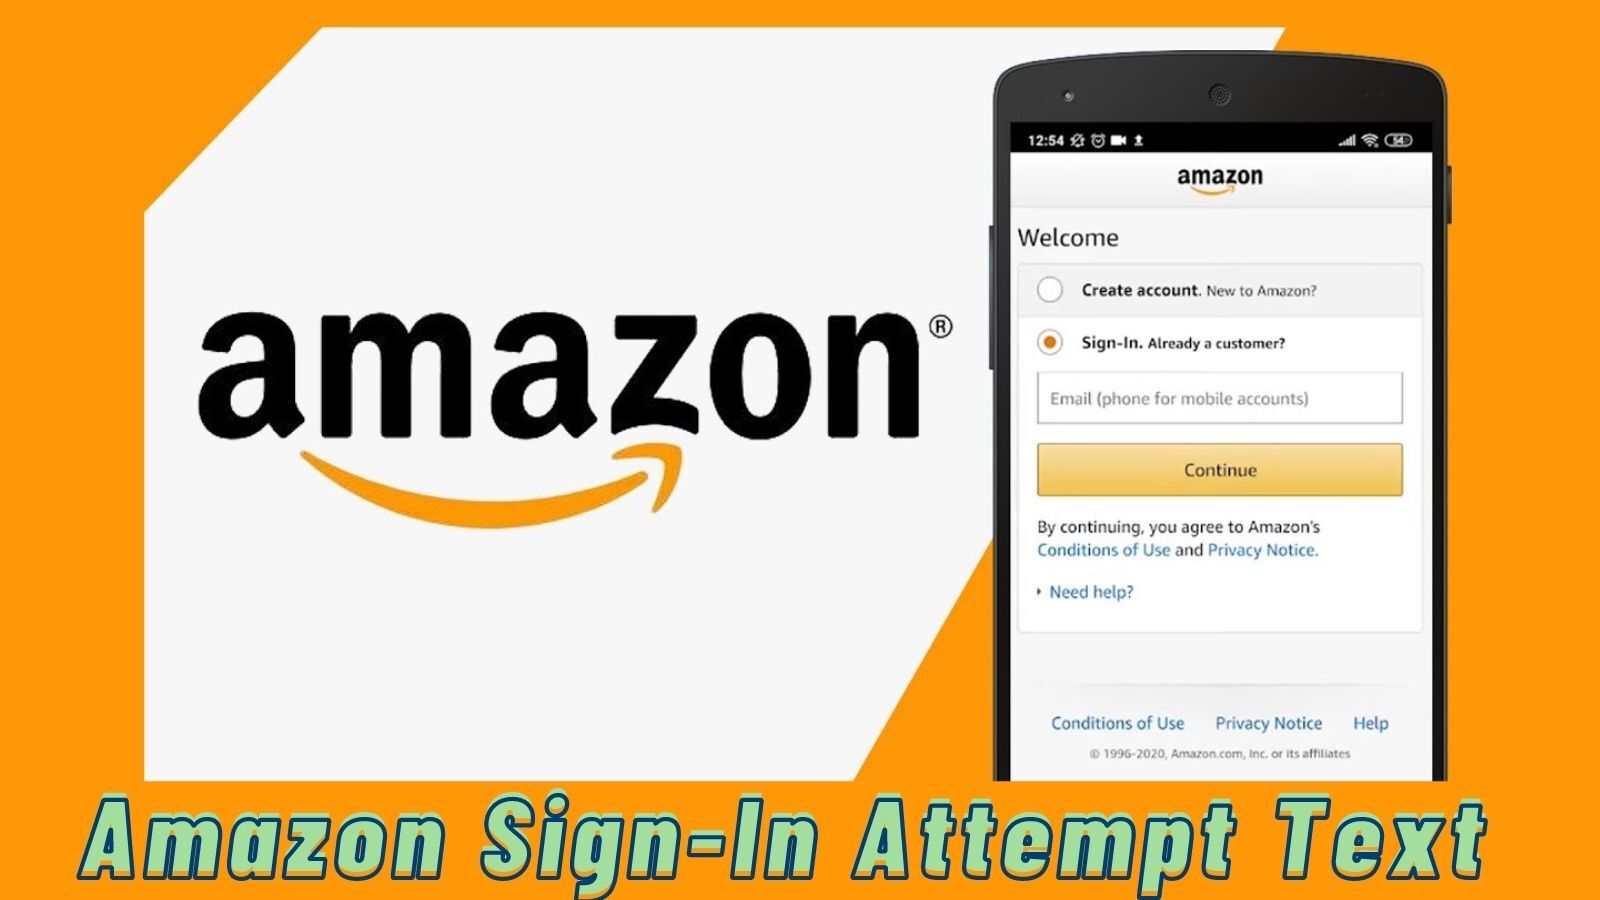 Amazon Sign-In Attempt Text (What Should You Be Careful Of)